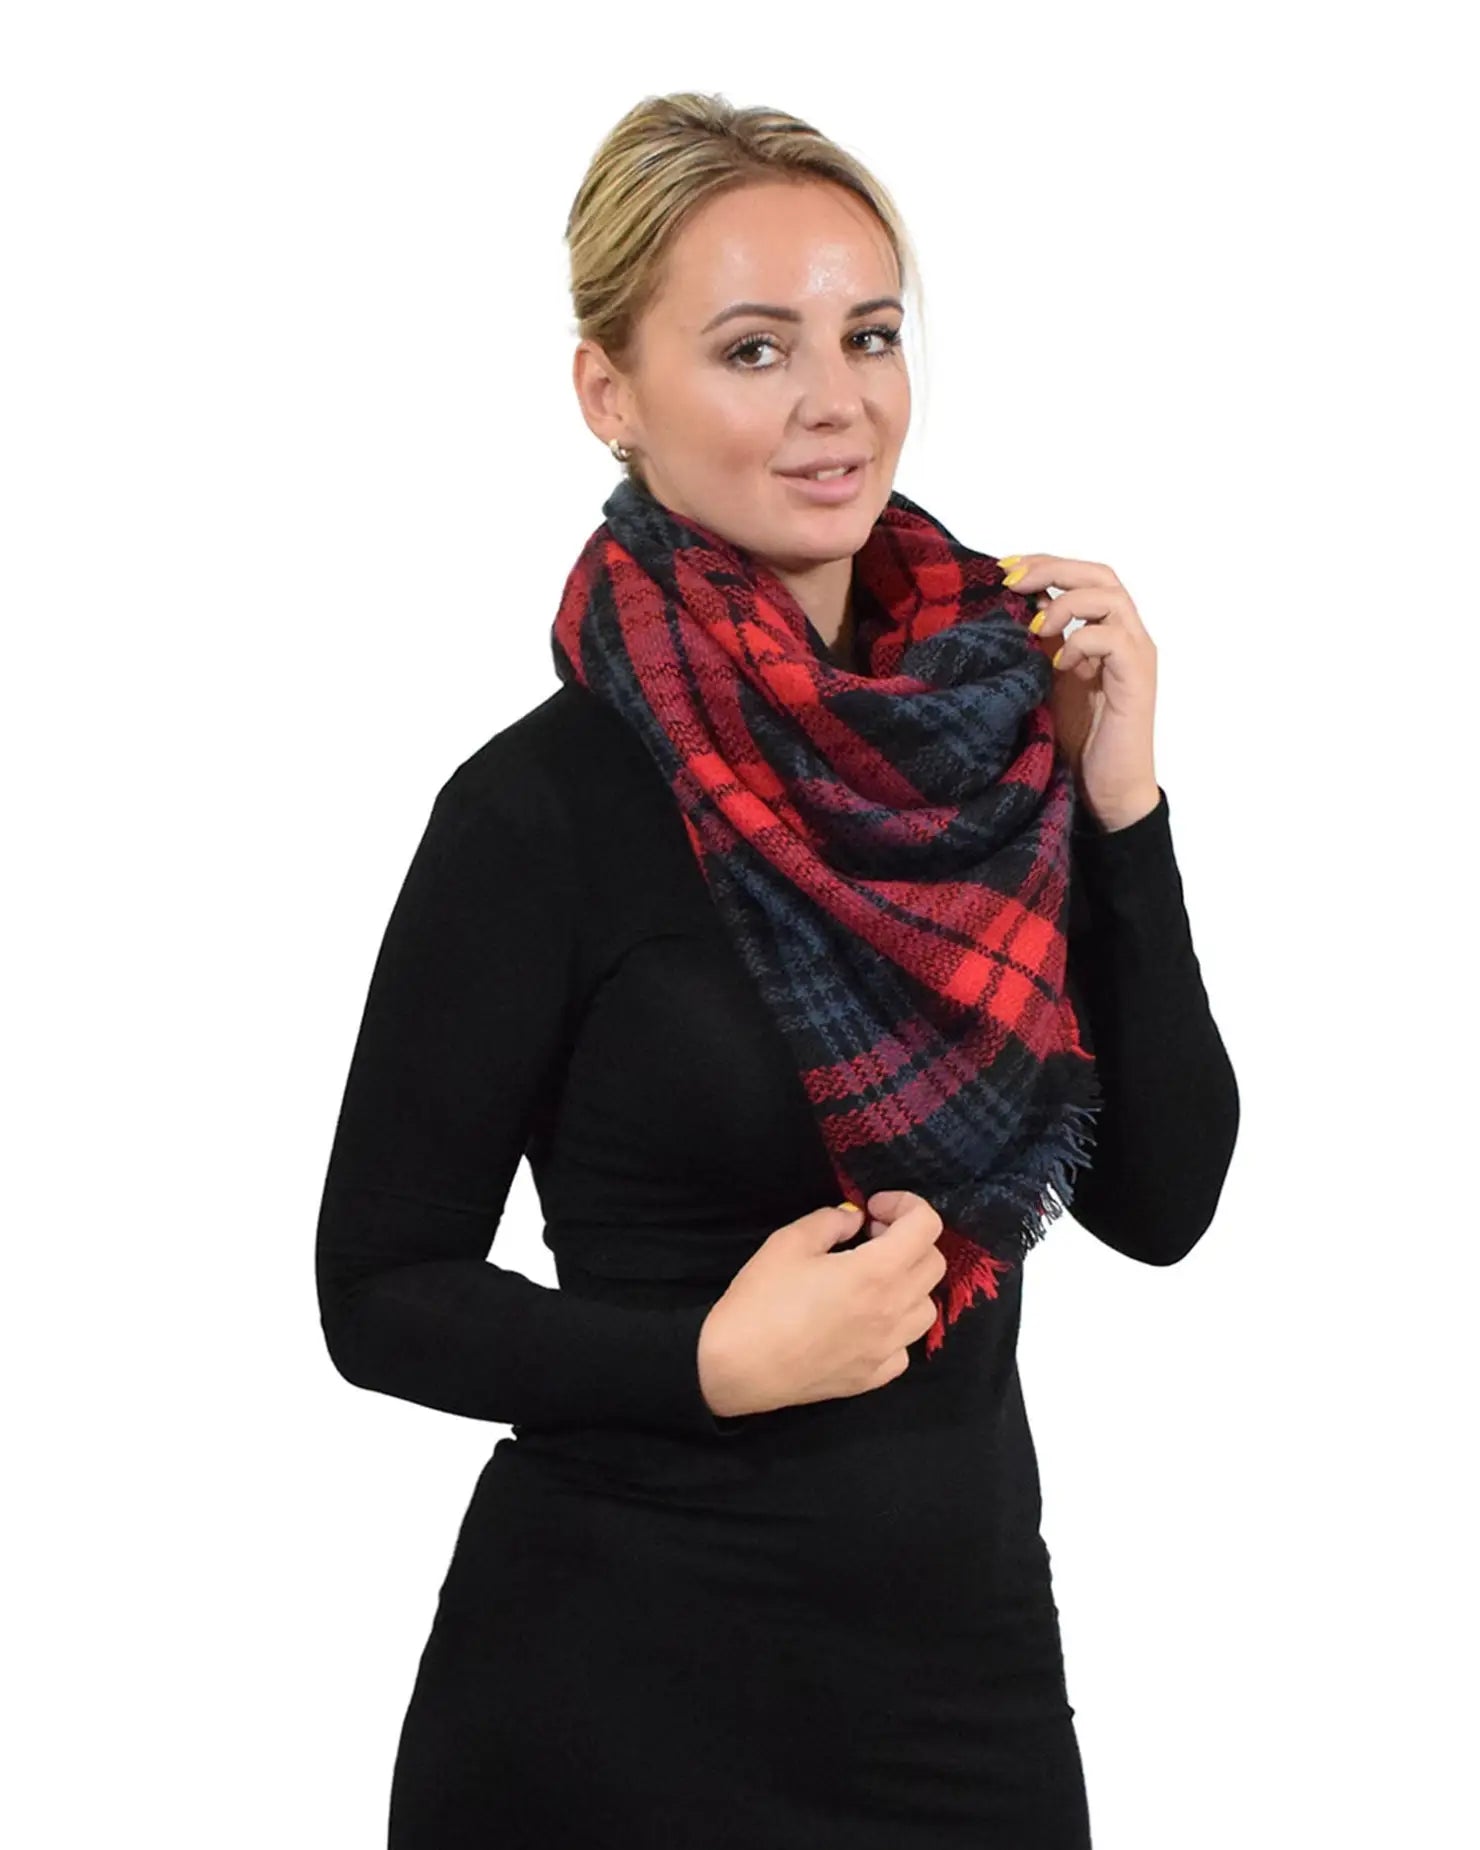 Oversized Tartan Check Winter Blanket Poncho on woman wearing red and black plaid scarf